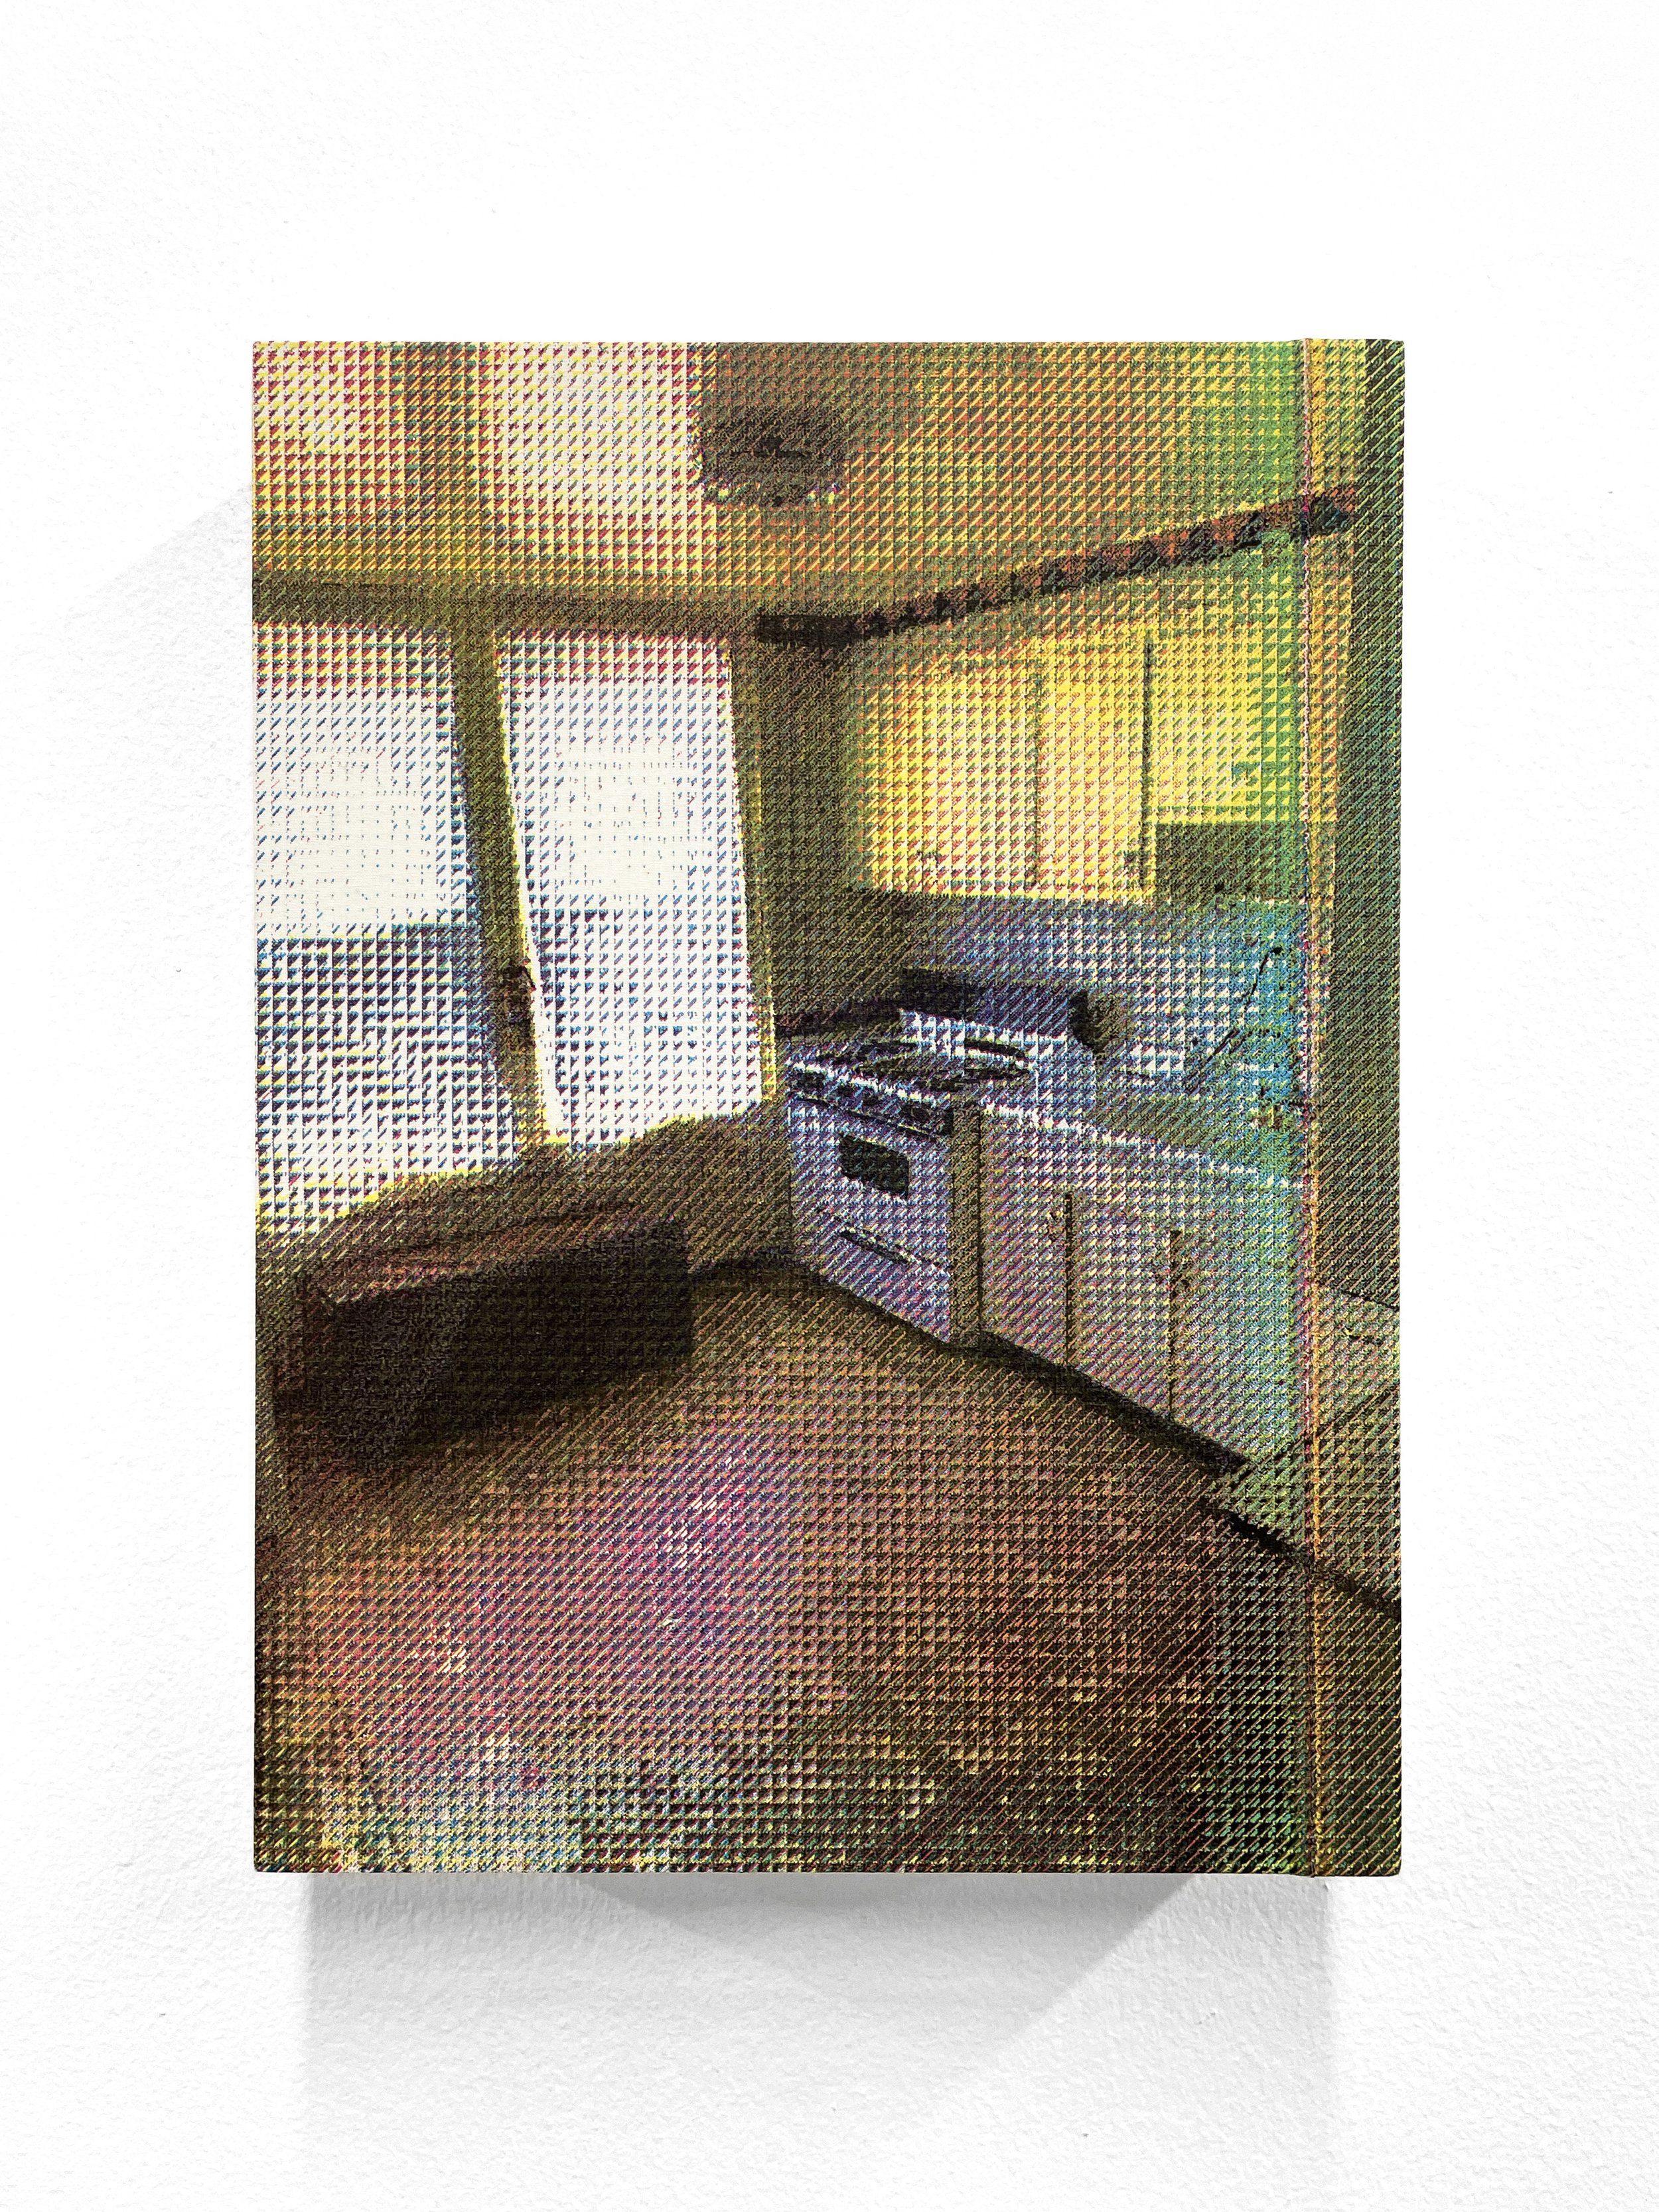    A last look—kitchen No. 1  , Stretched screenprint on poly-cotton fabric, 12” x 9” x 2” 